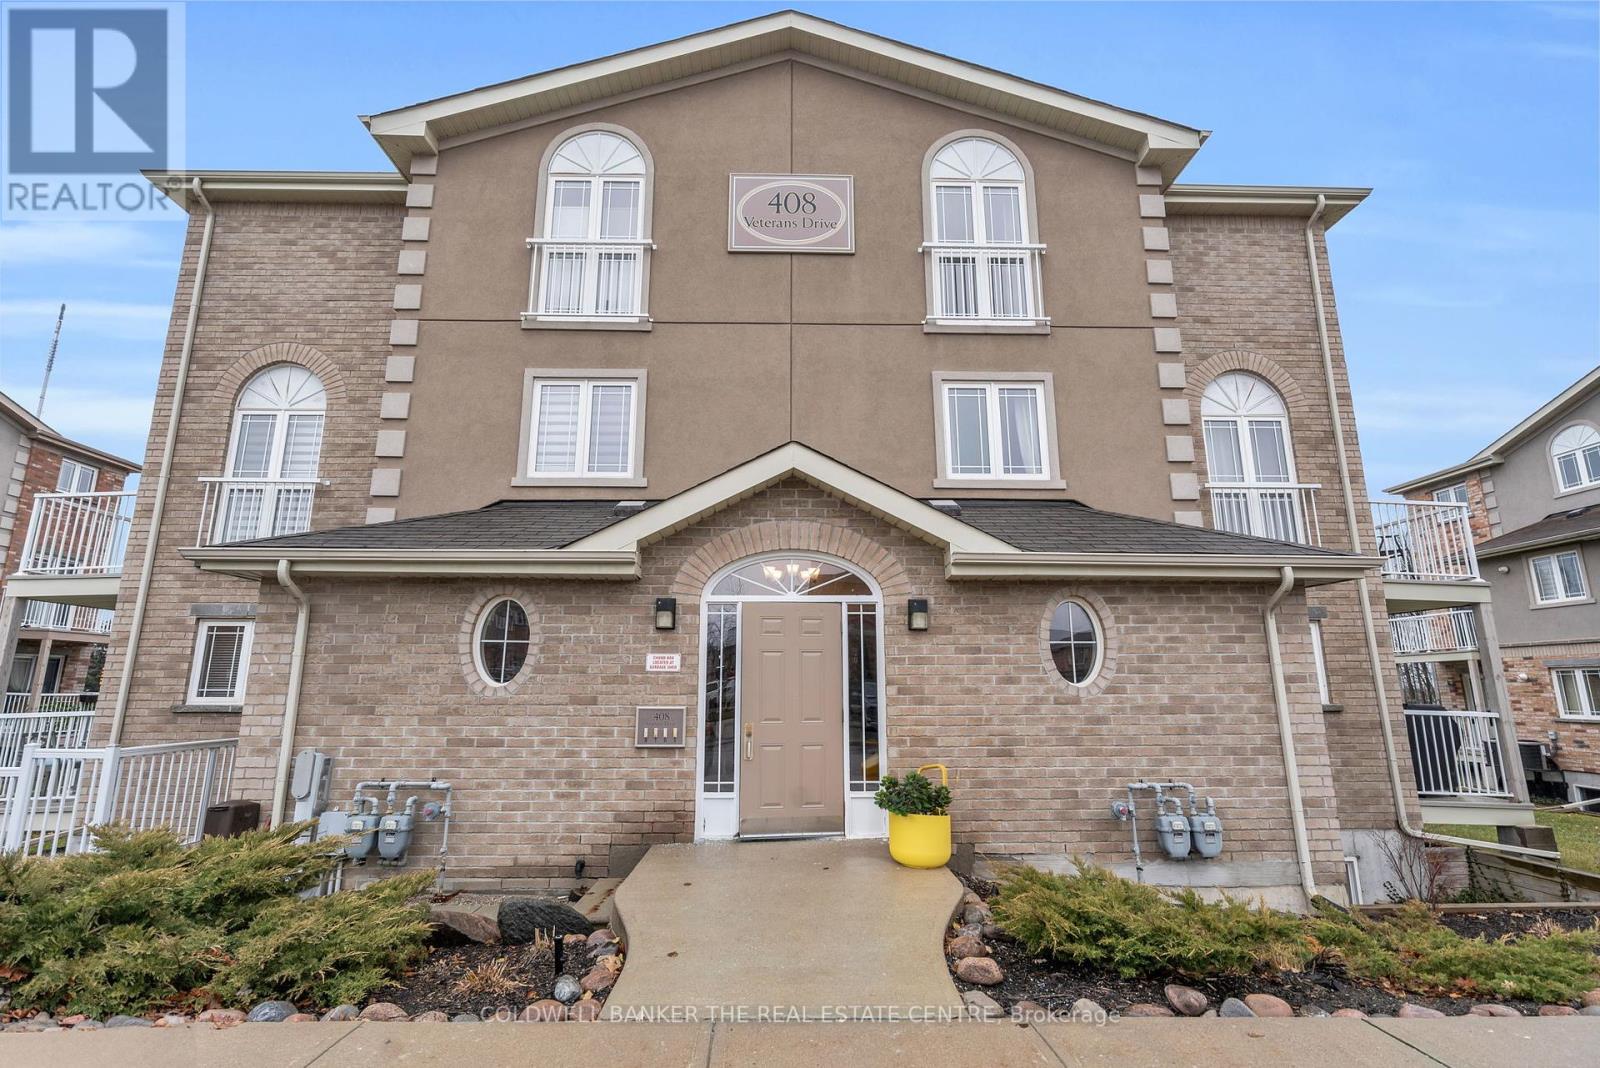 #8 -408 VETERANS DR located in Barrie, Ontario